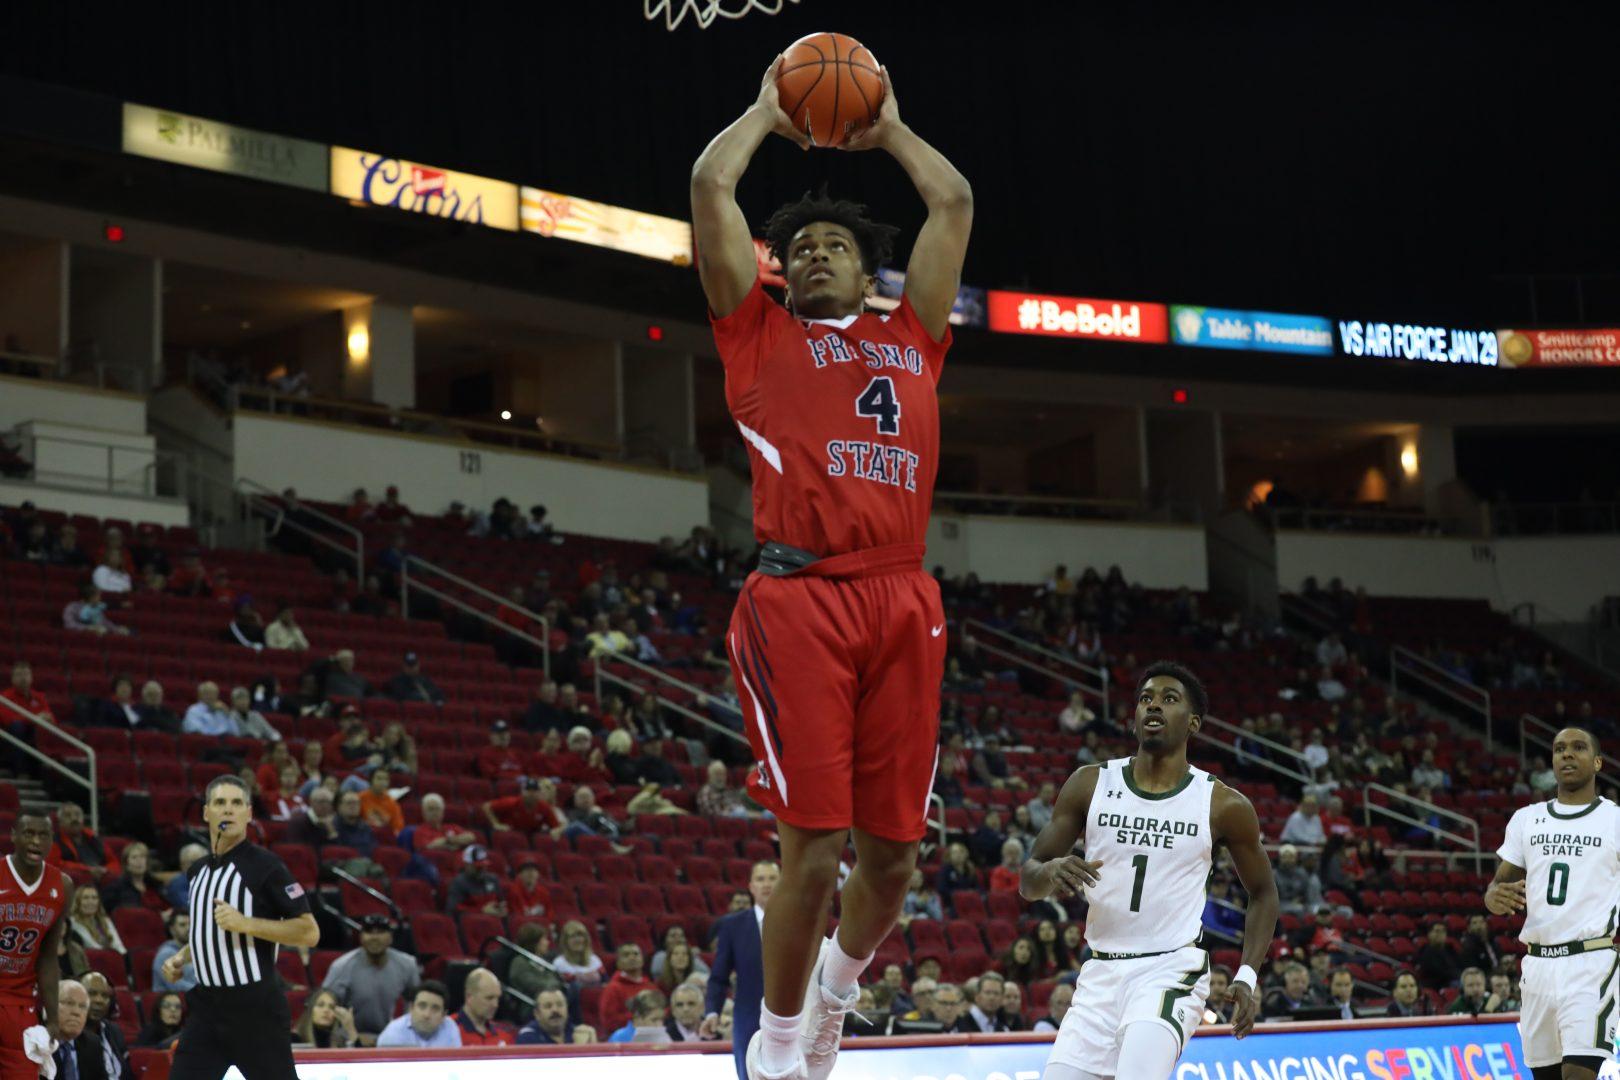 Niven Hart (4) dunks on the fast break against Colorado State at the Save Mart Center on Tuesday, Feb. 4, 2020. (Vendila Yang/The Collegian)